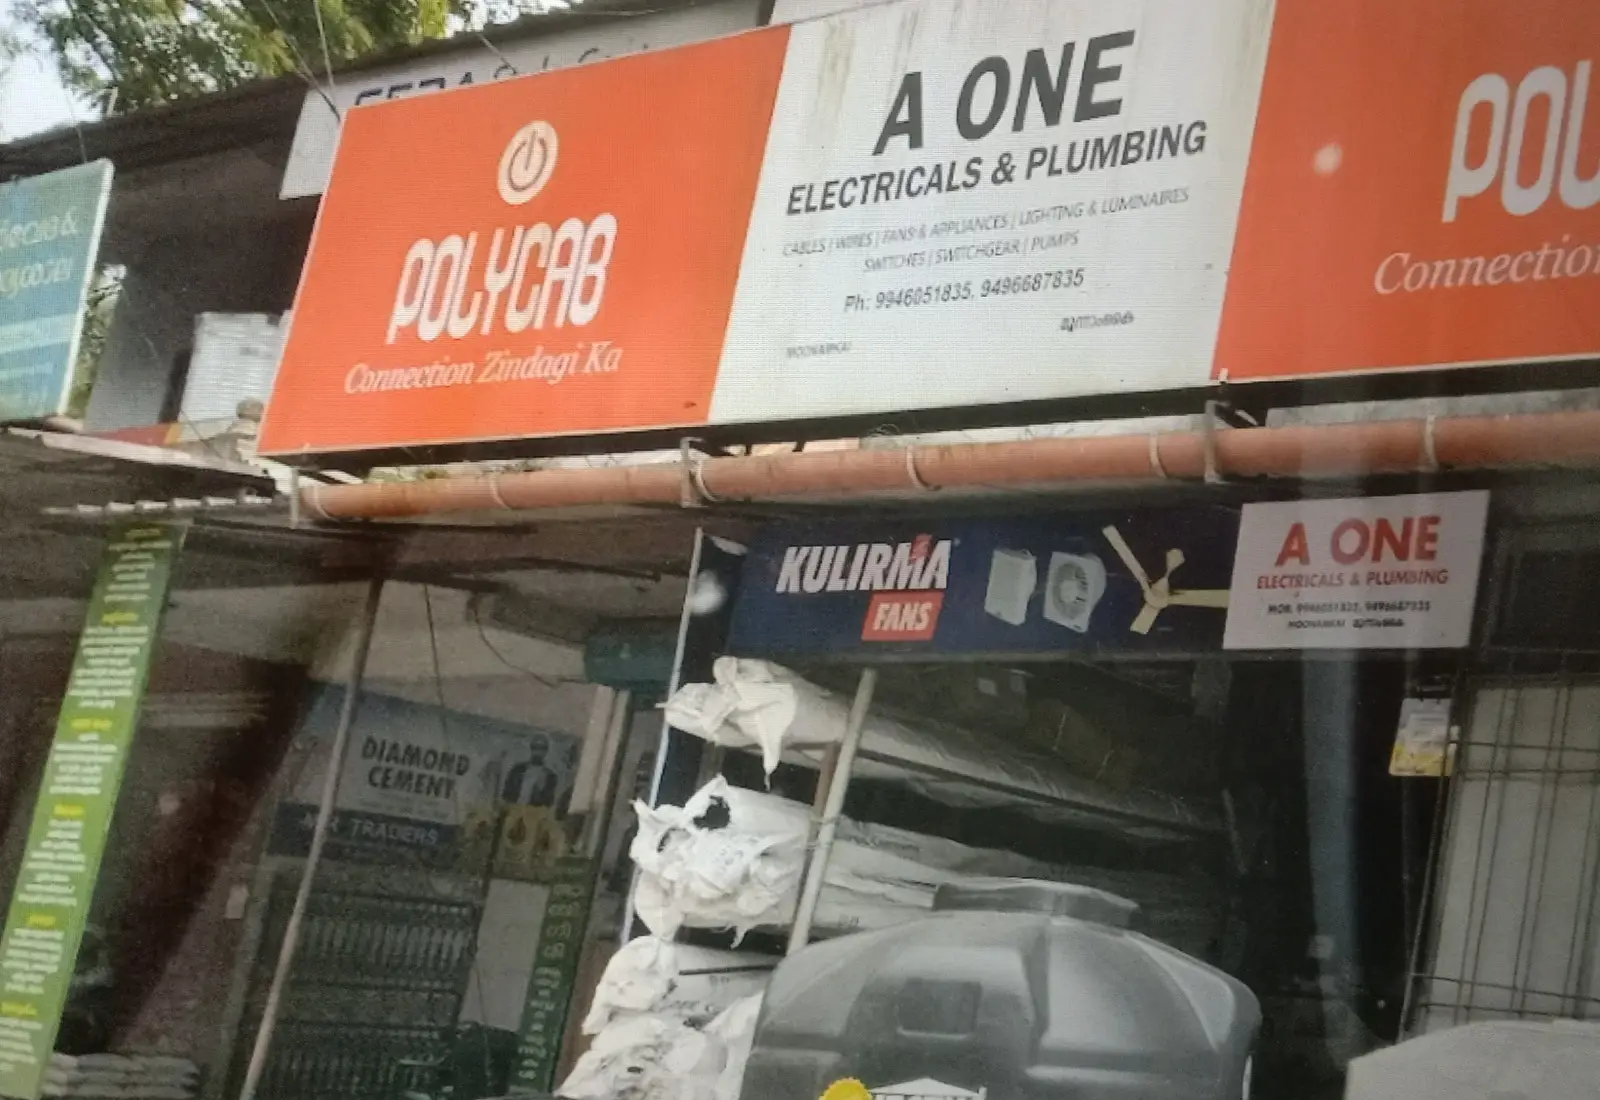  A One  Electrical & Plumbing